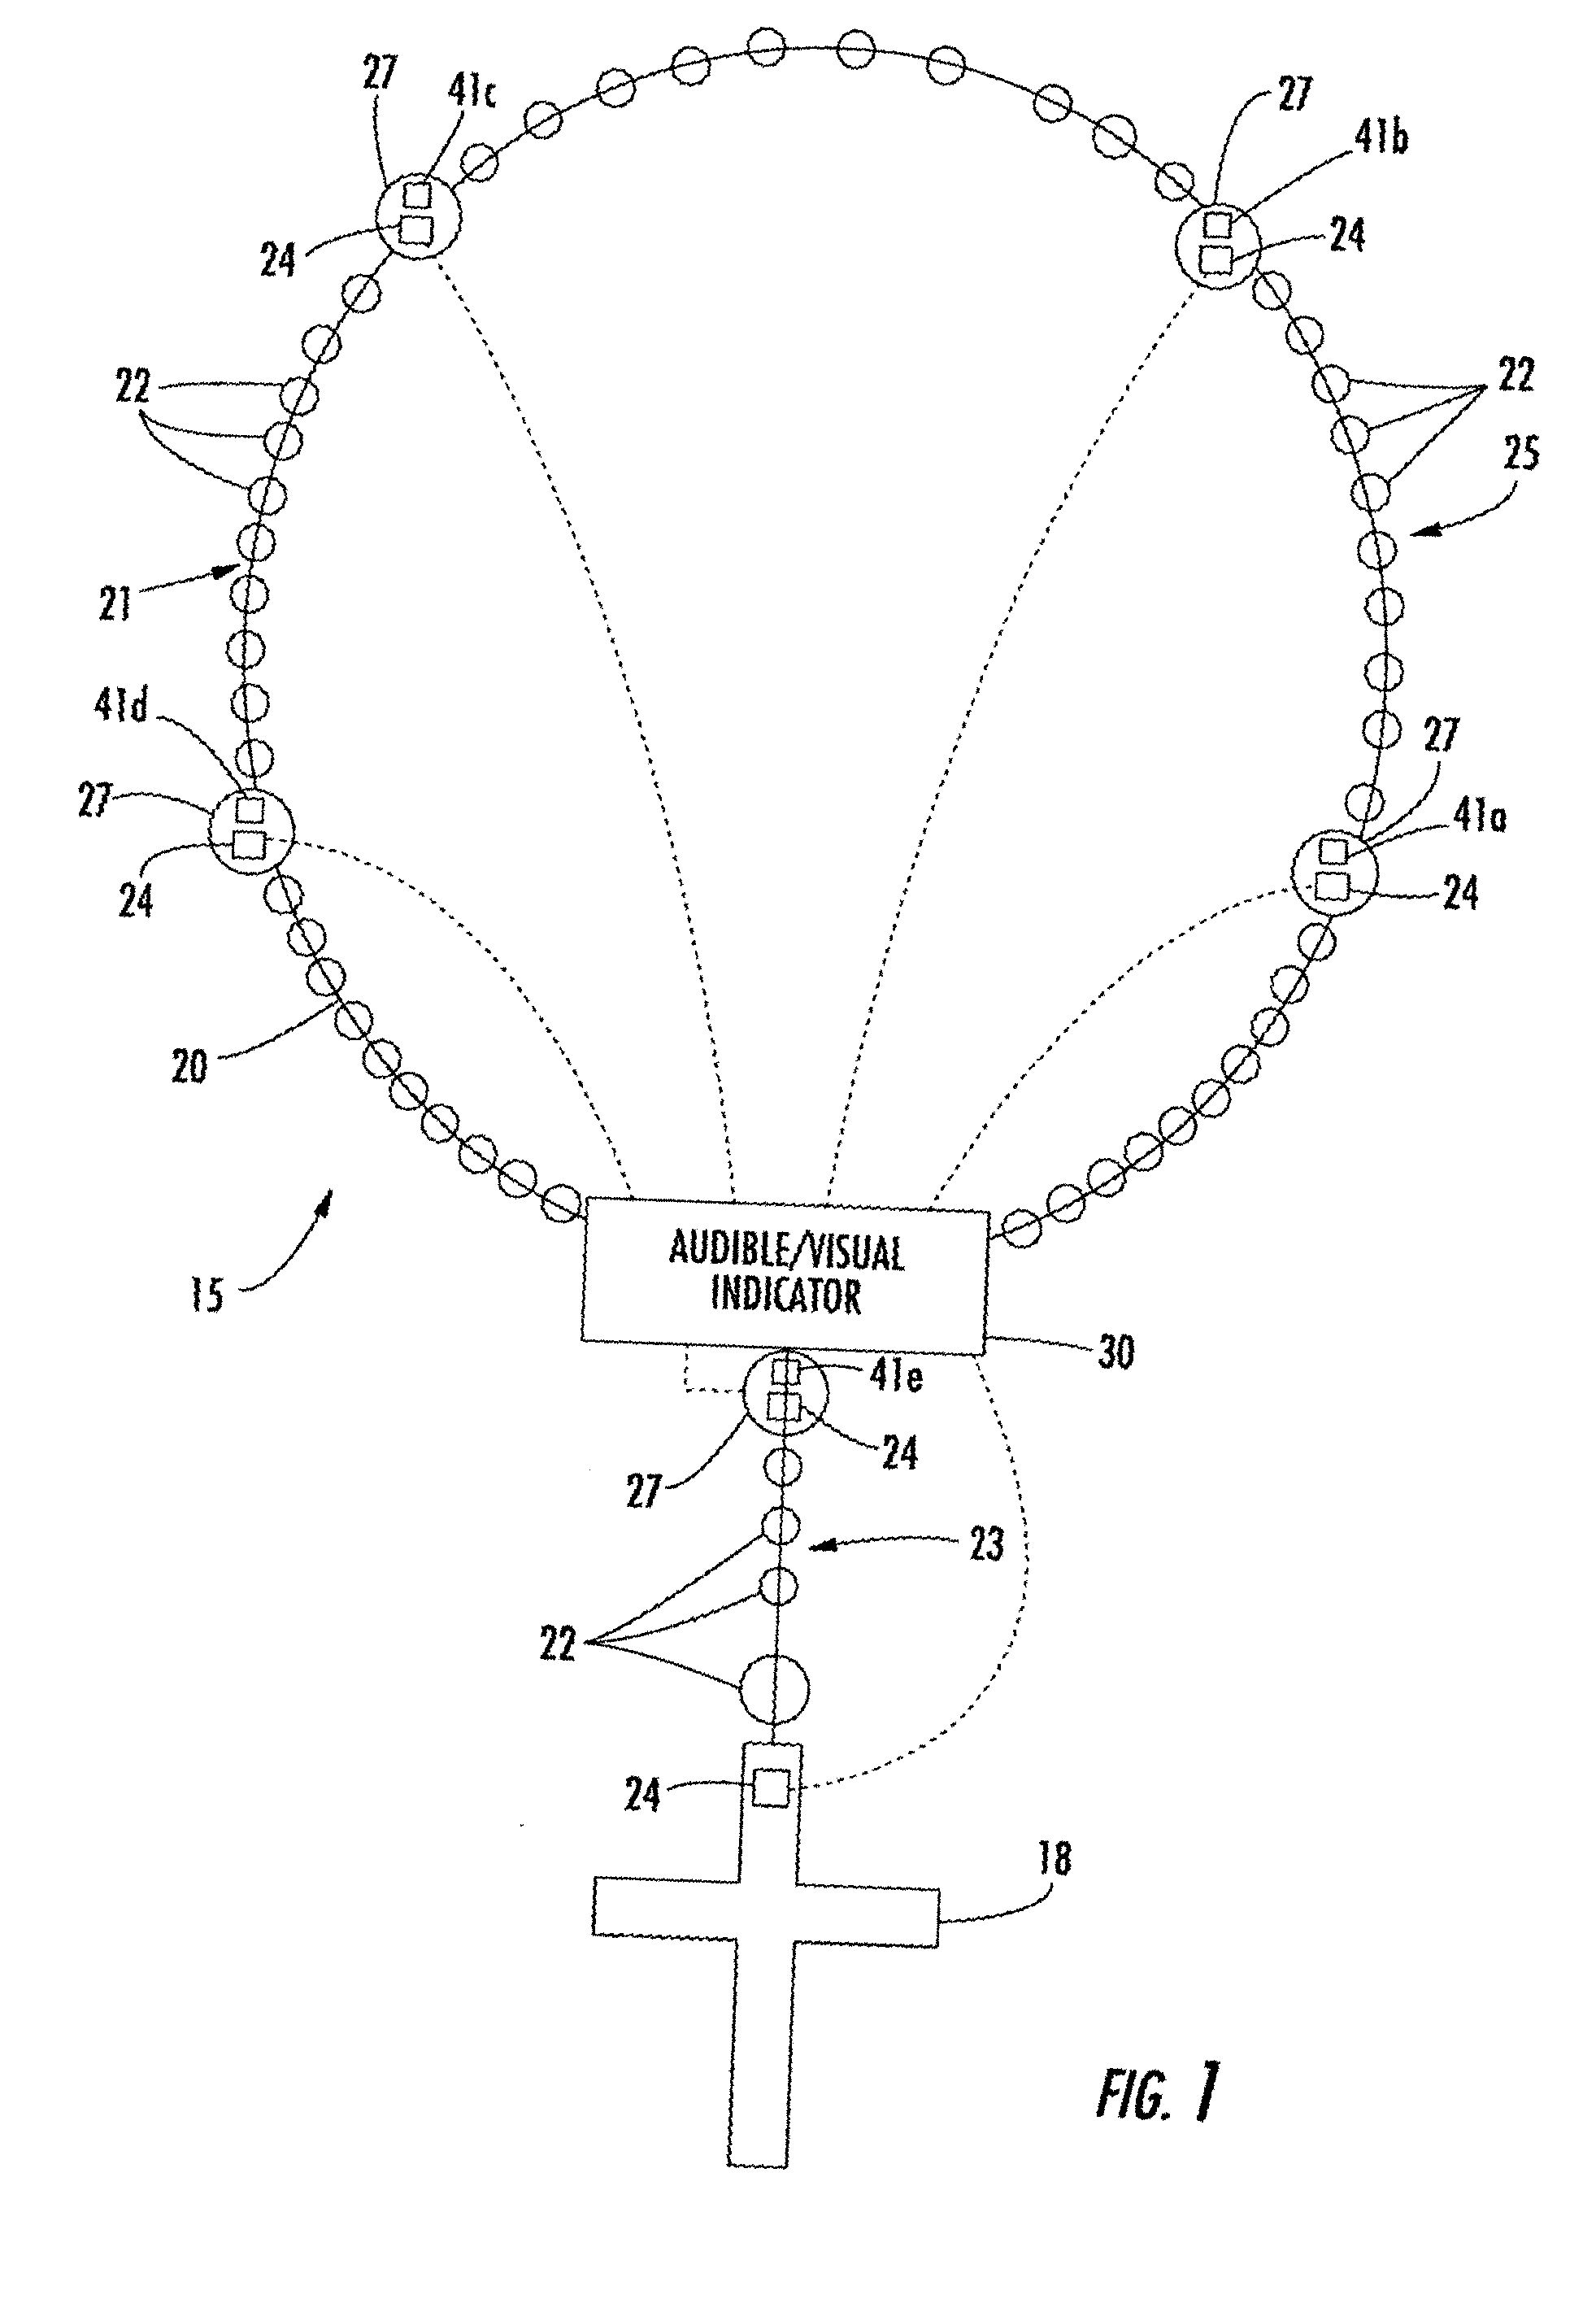 Rosary having audible and/or visual indicators and related methods